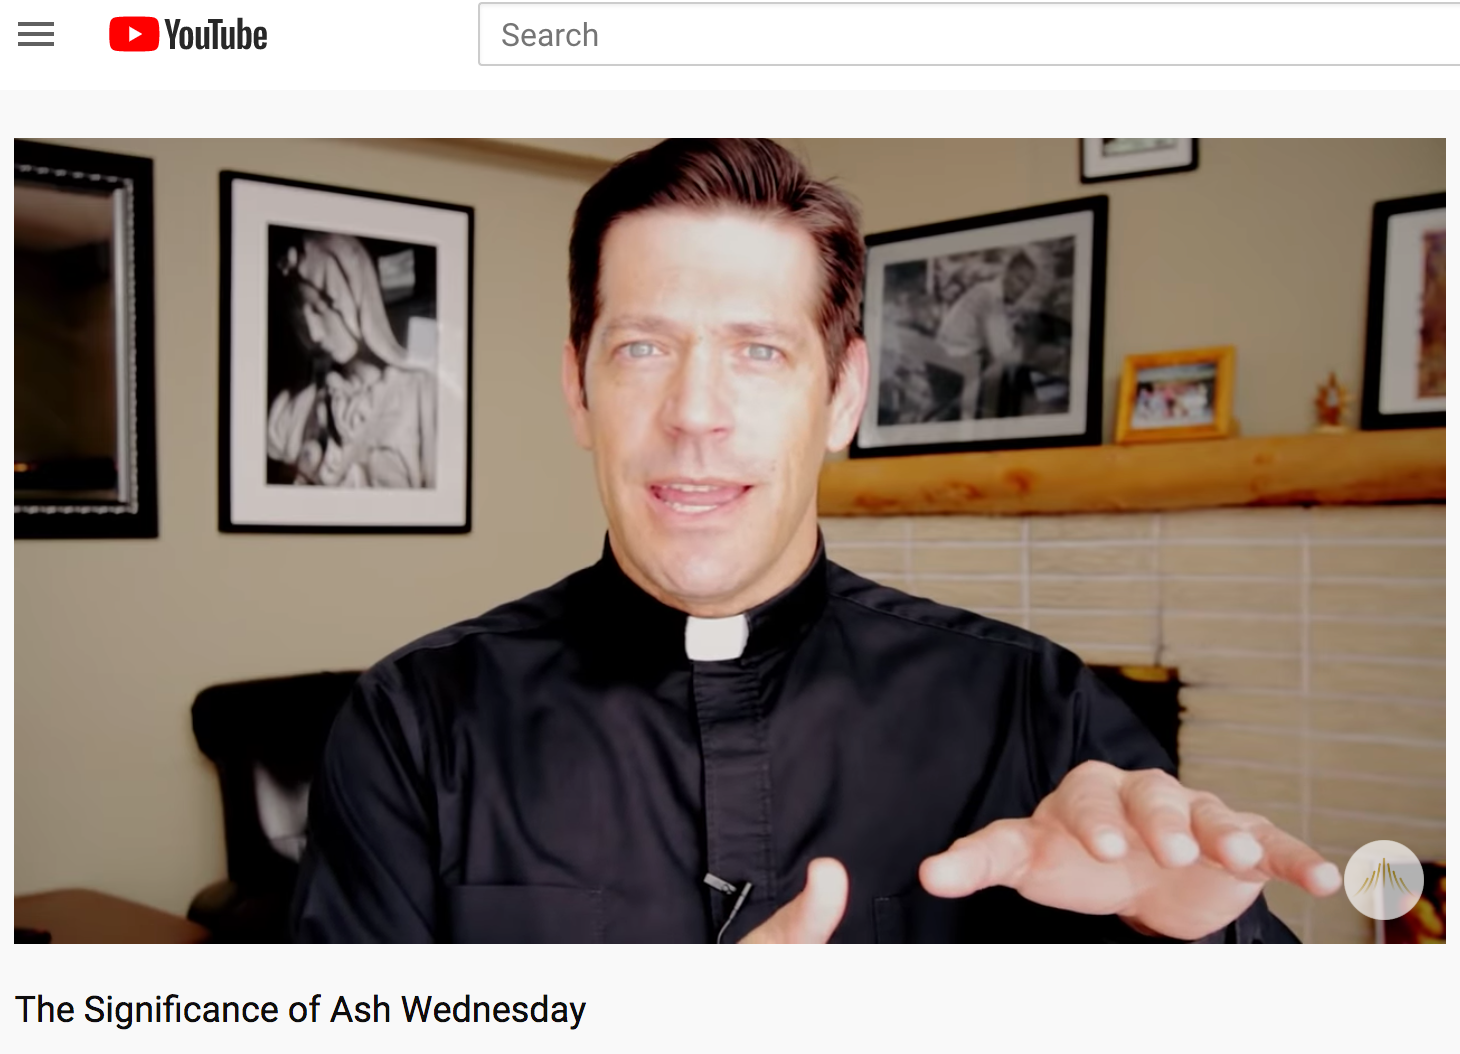 This Epic Video Contains the Only Word You Need to Hear This Ash Wednesday